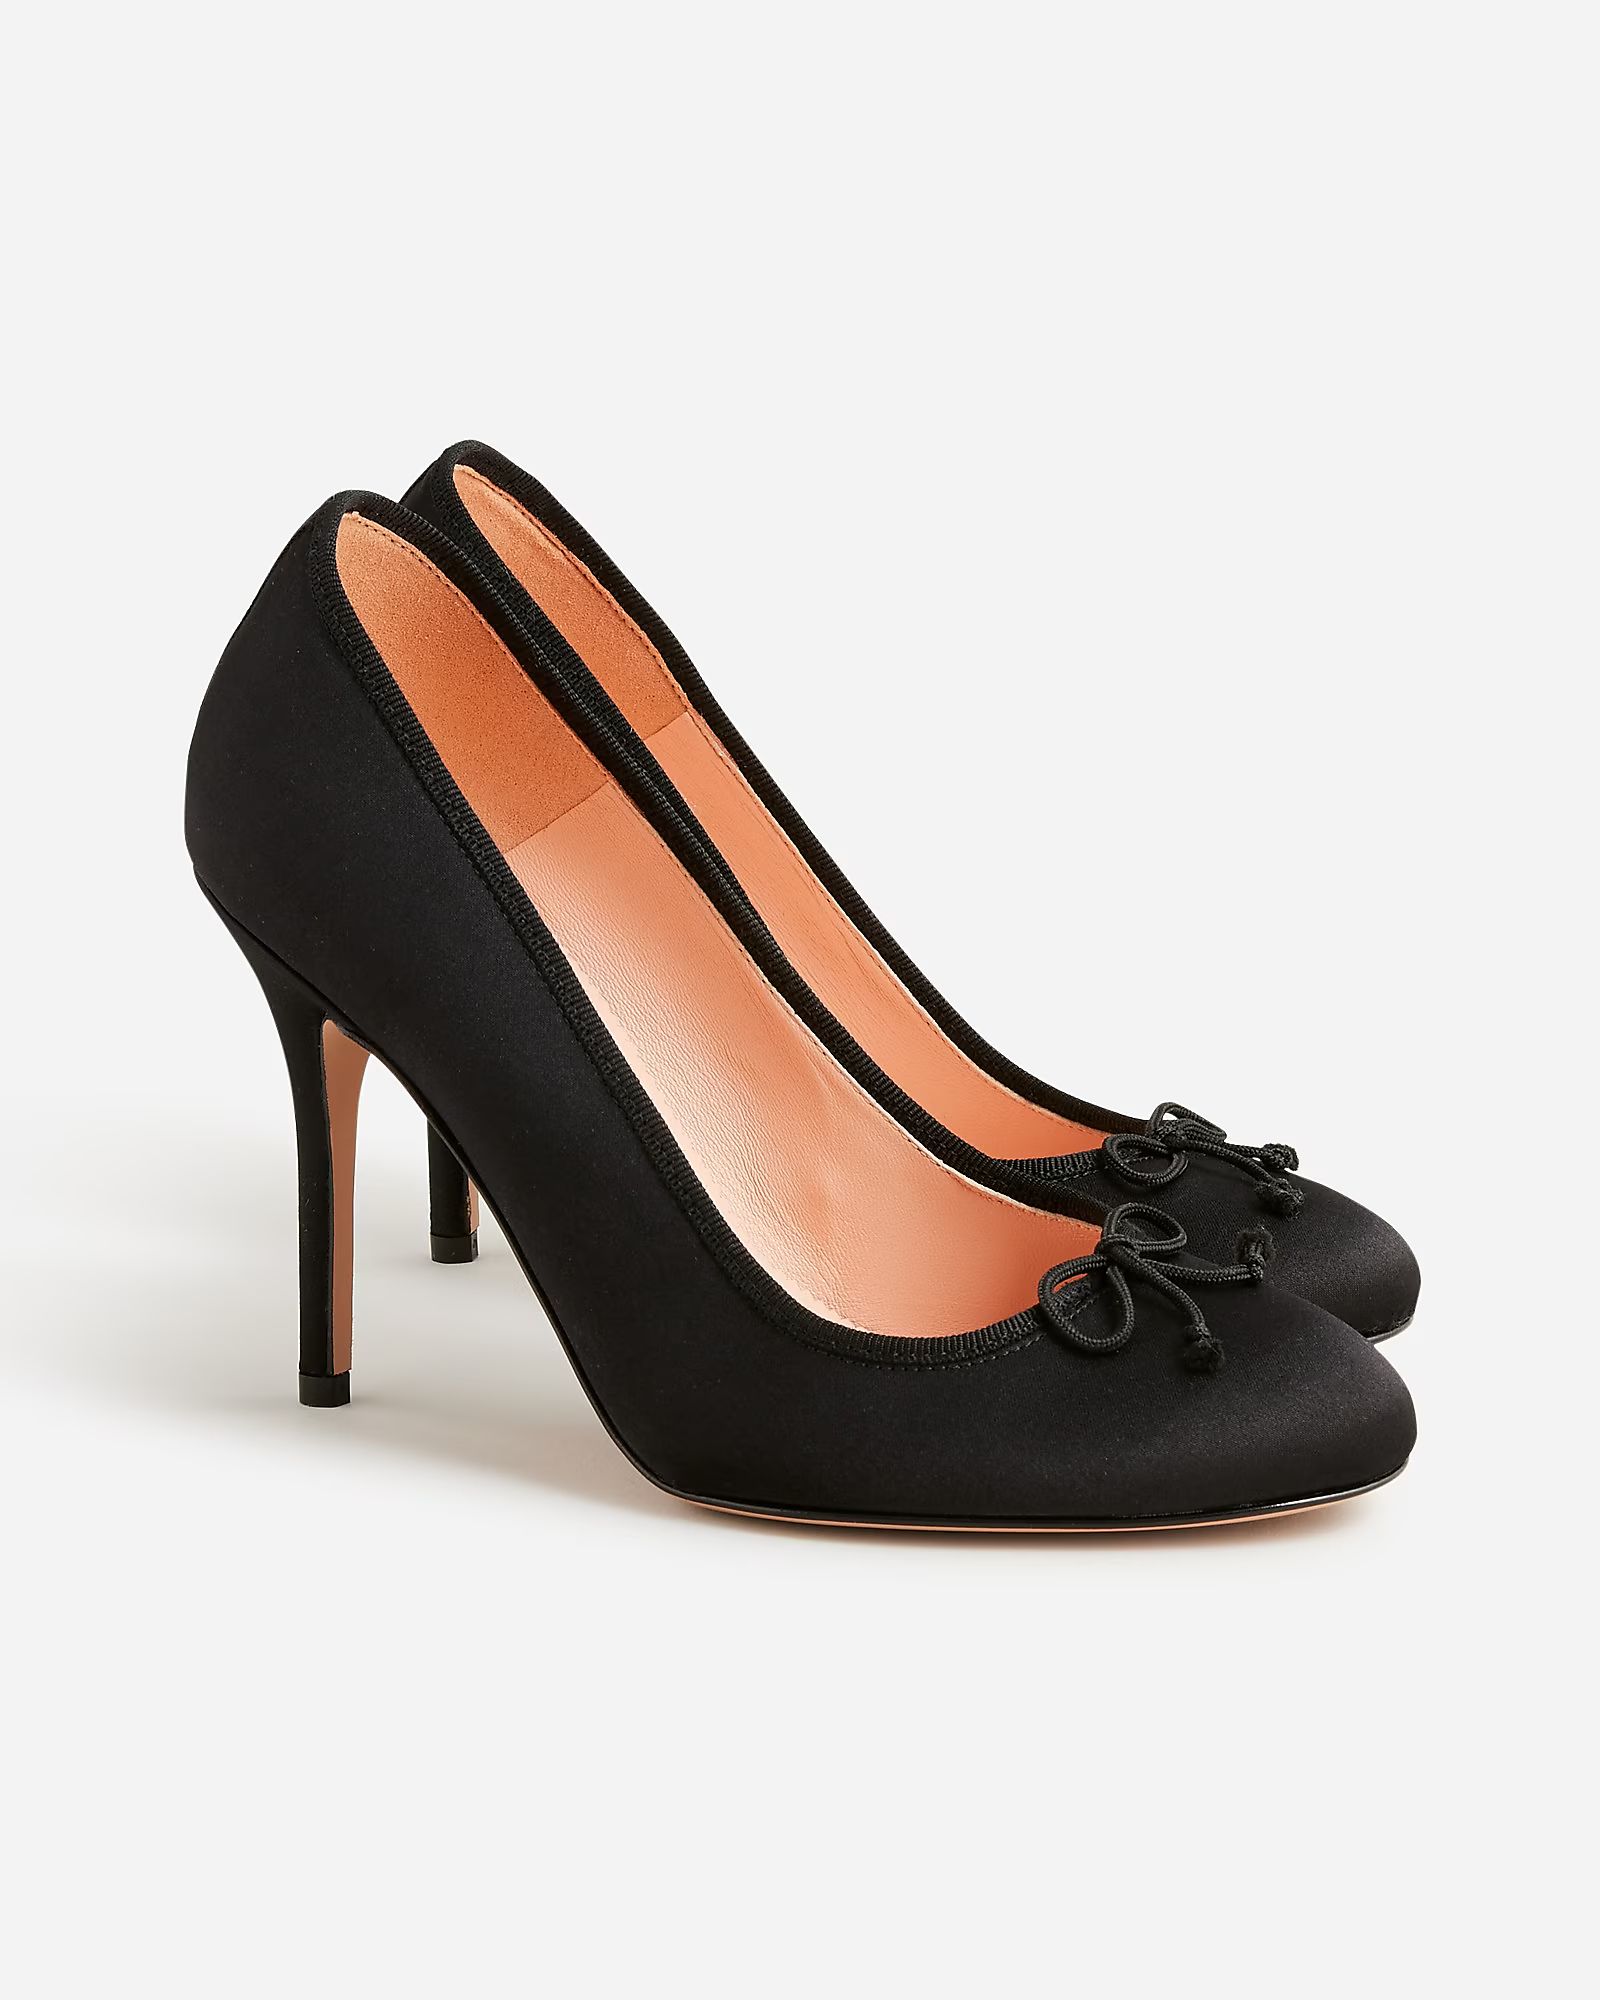 top rated4.7(15 REVIEWS)Collection made-in-Italy ballet pumps$107.99-$172.99$268.00Extra 30% off ... | J.Crew US